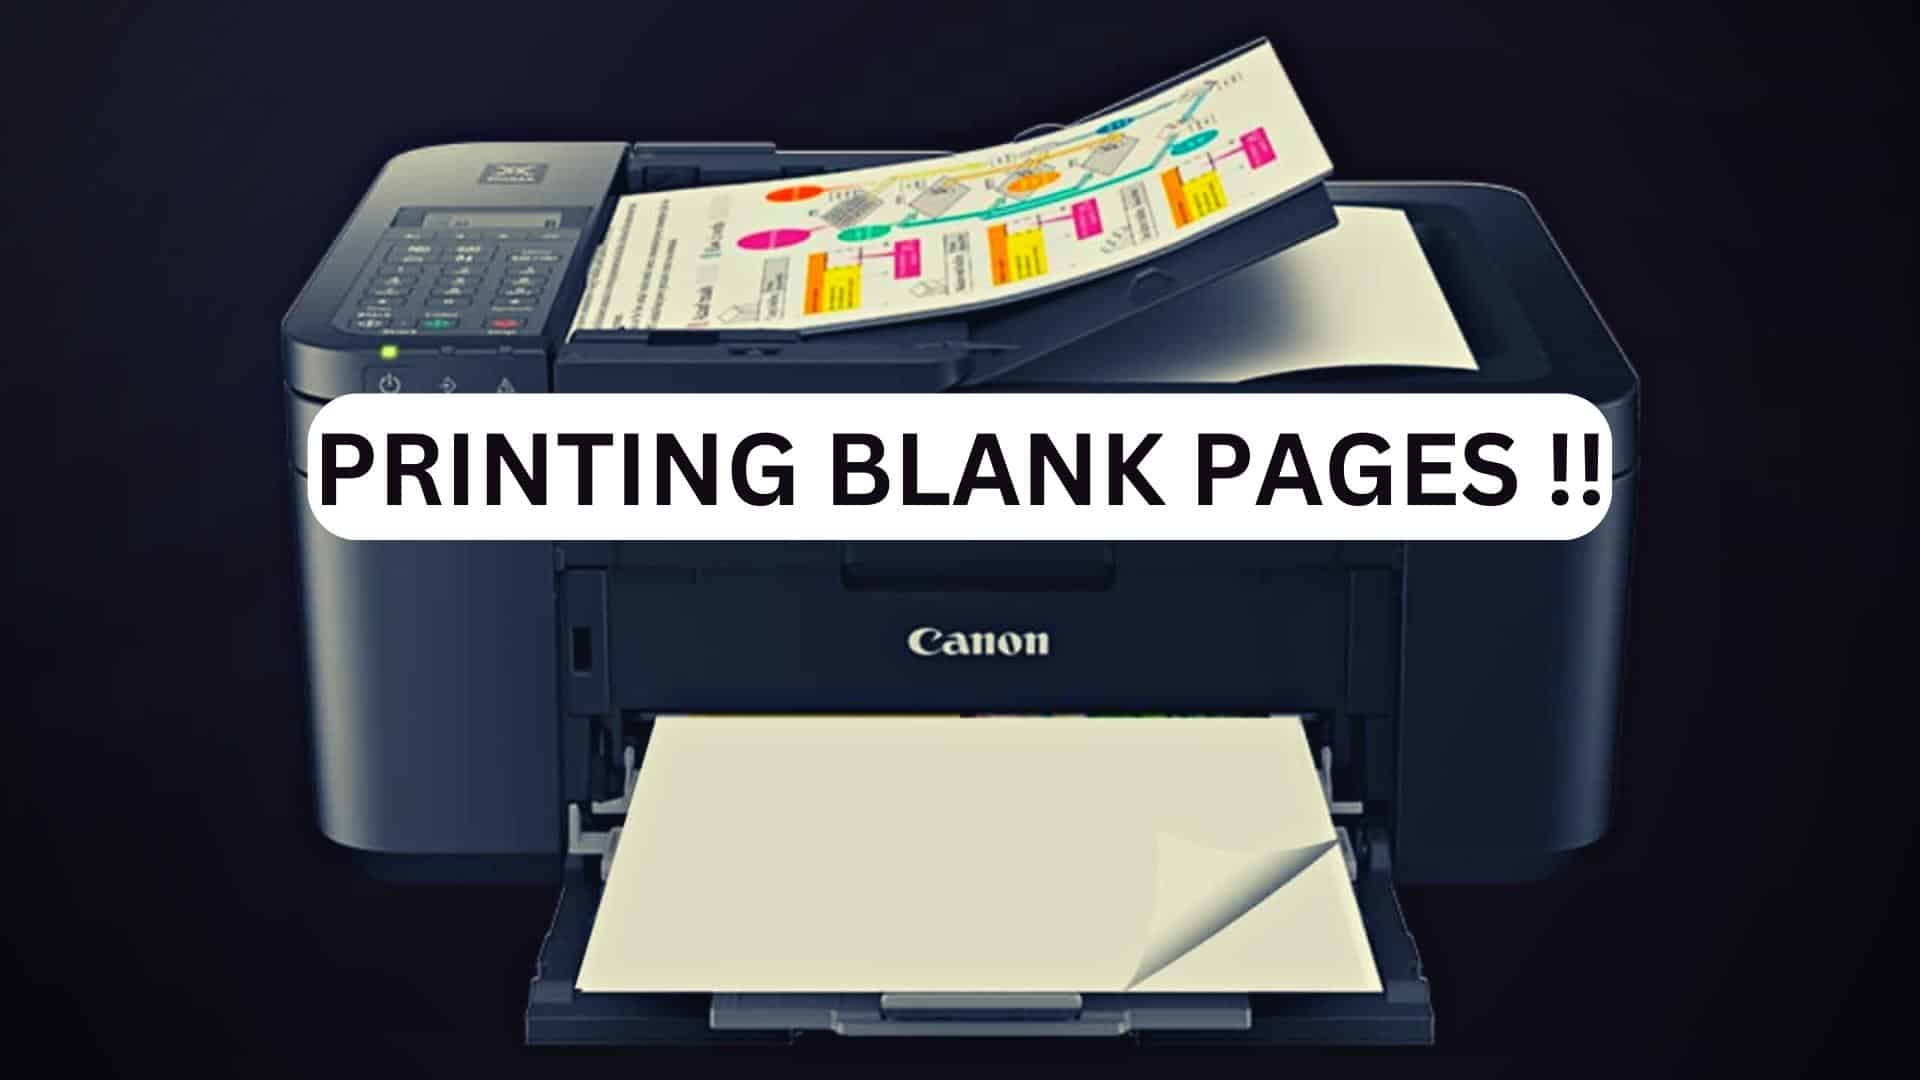 canon-printing-blank-pages